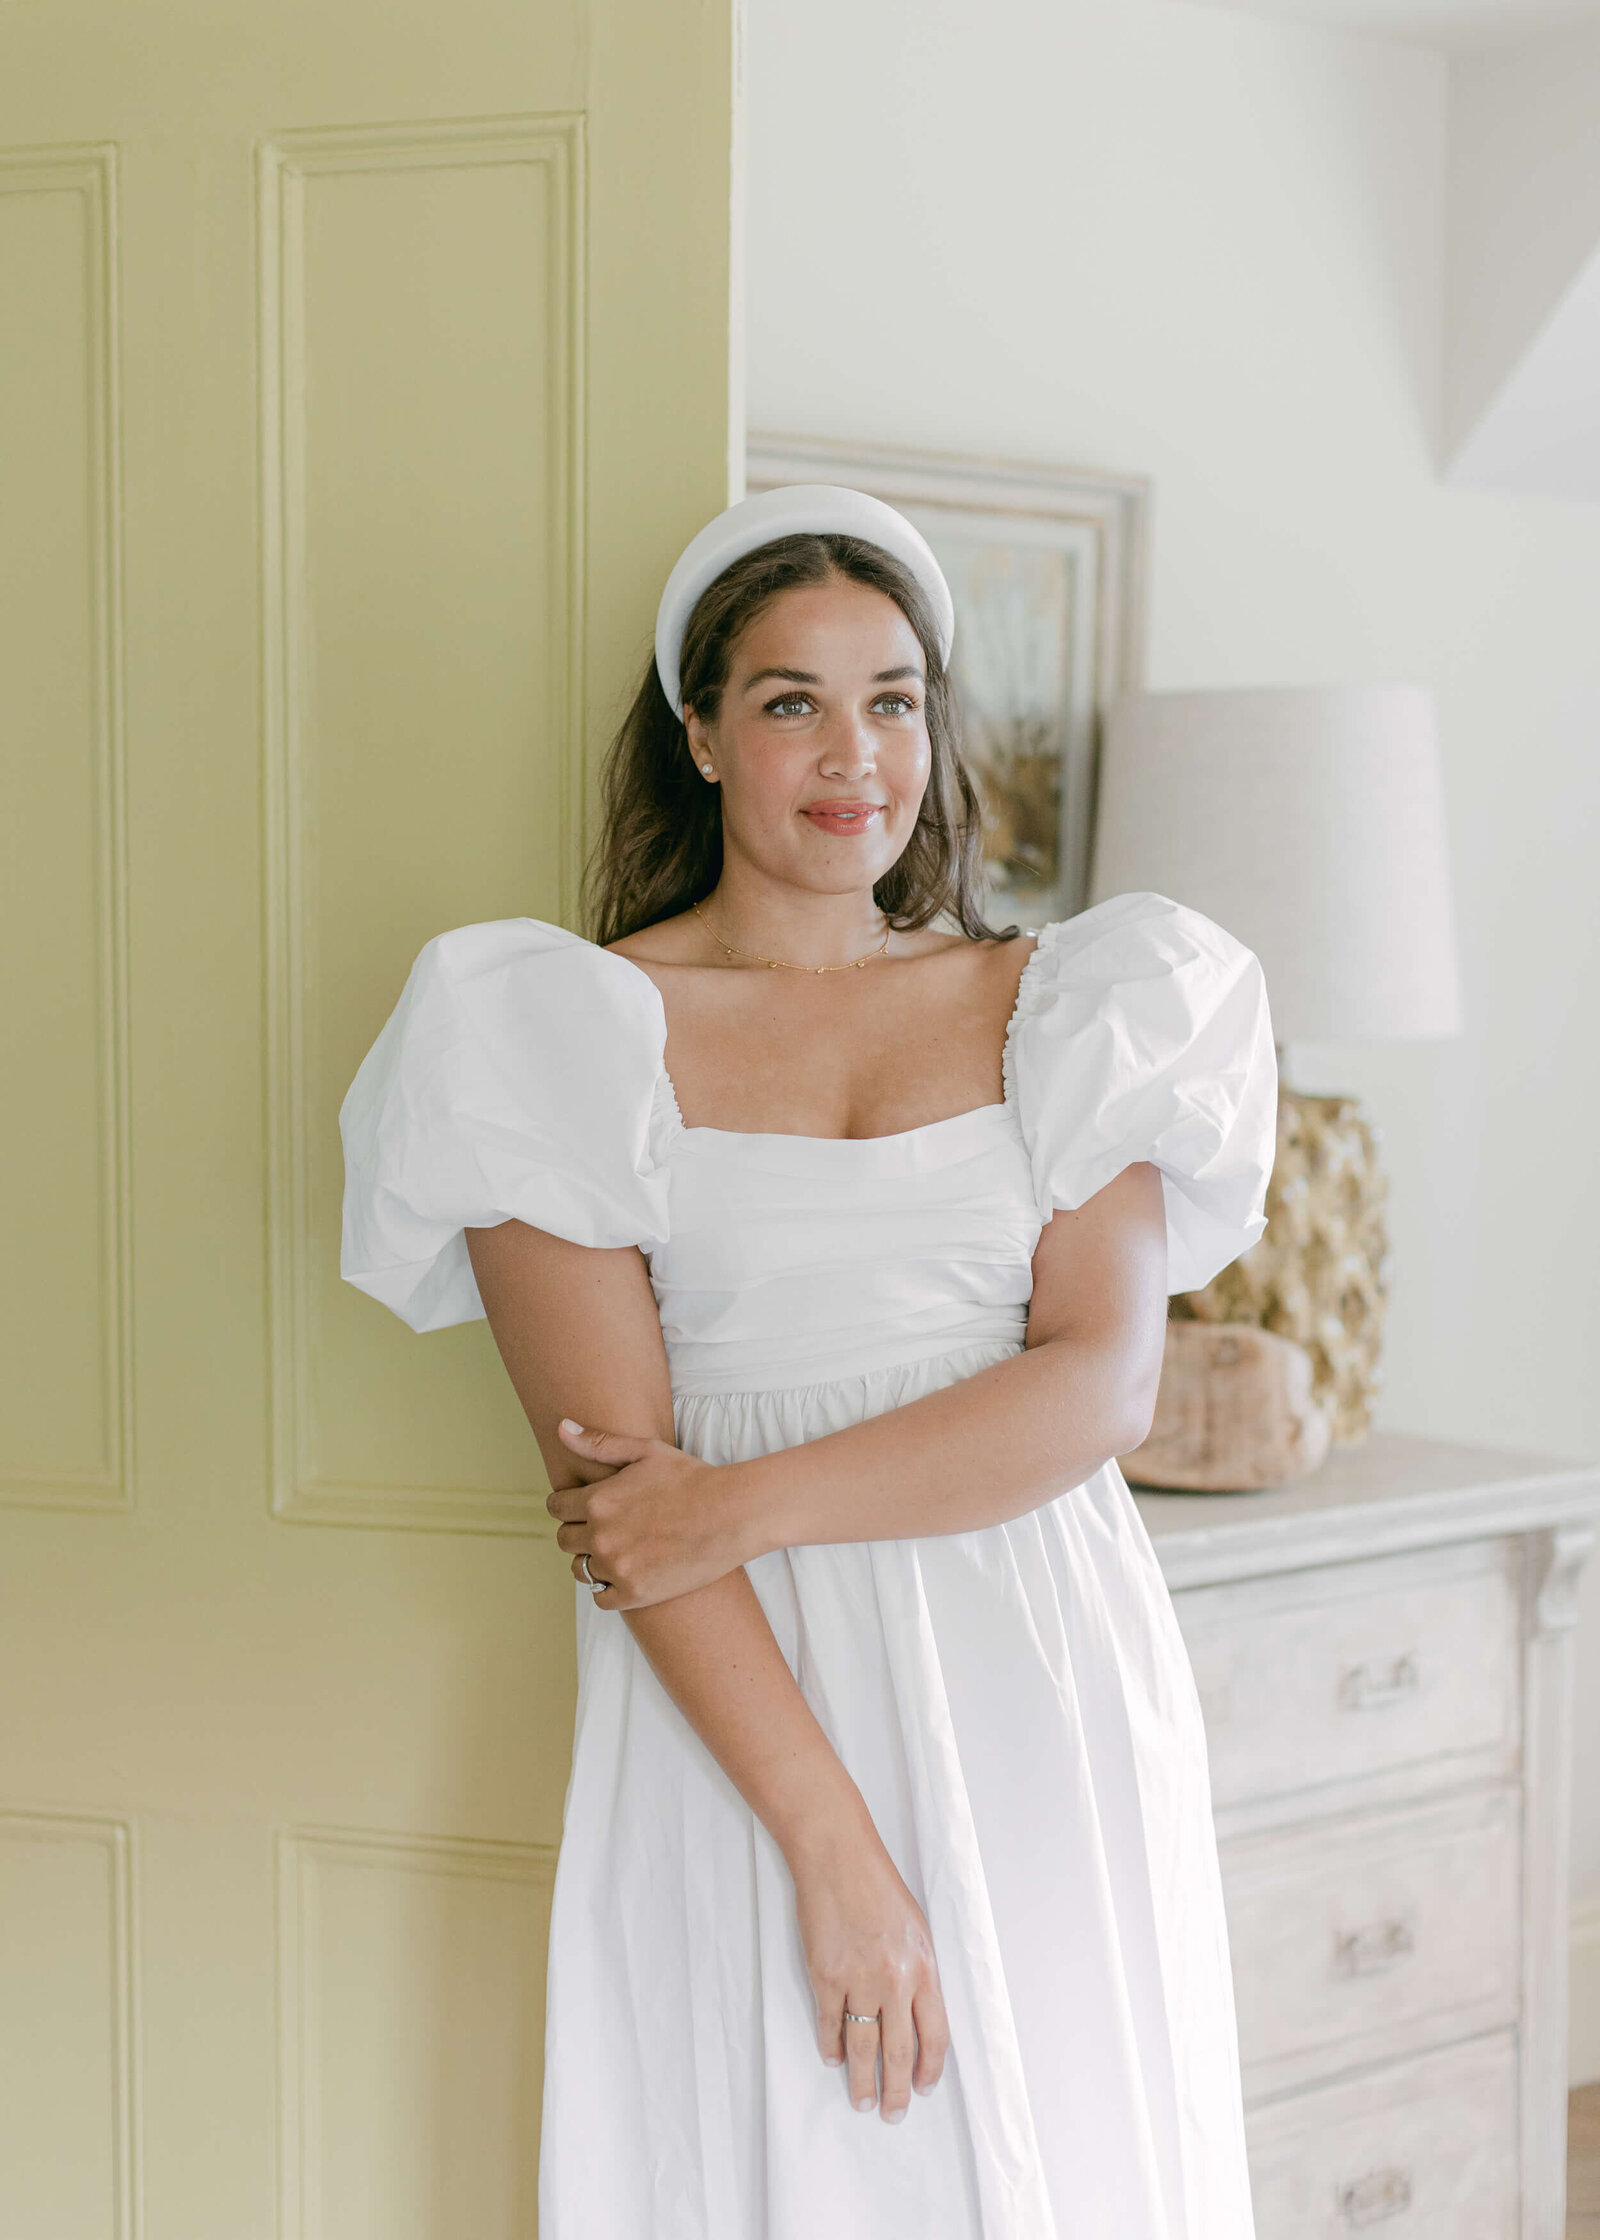 chloe-winstanley-fashion-editorial-clementineandmint-plumcottage-white-dress-bow